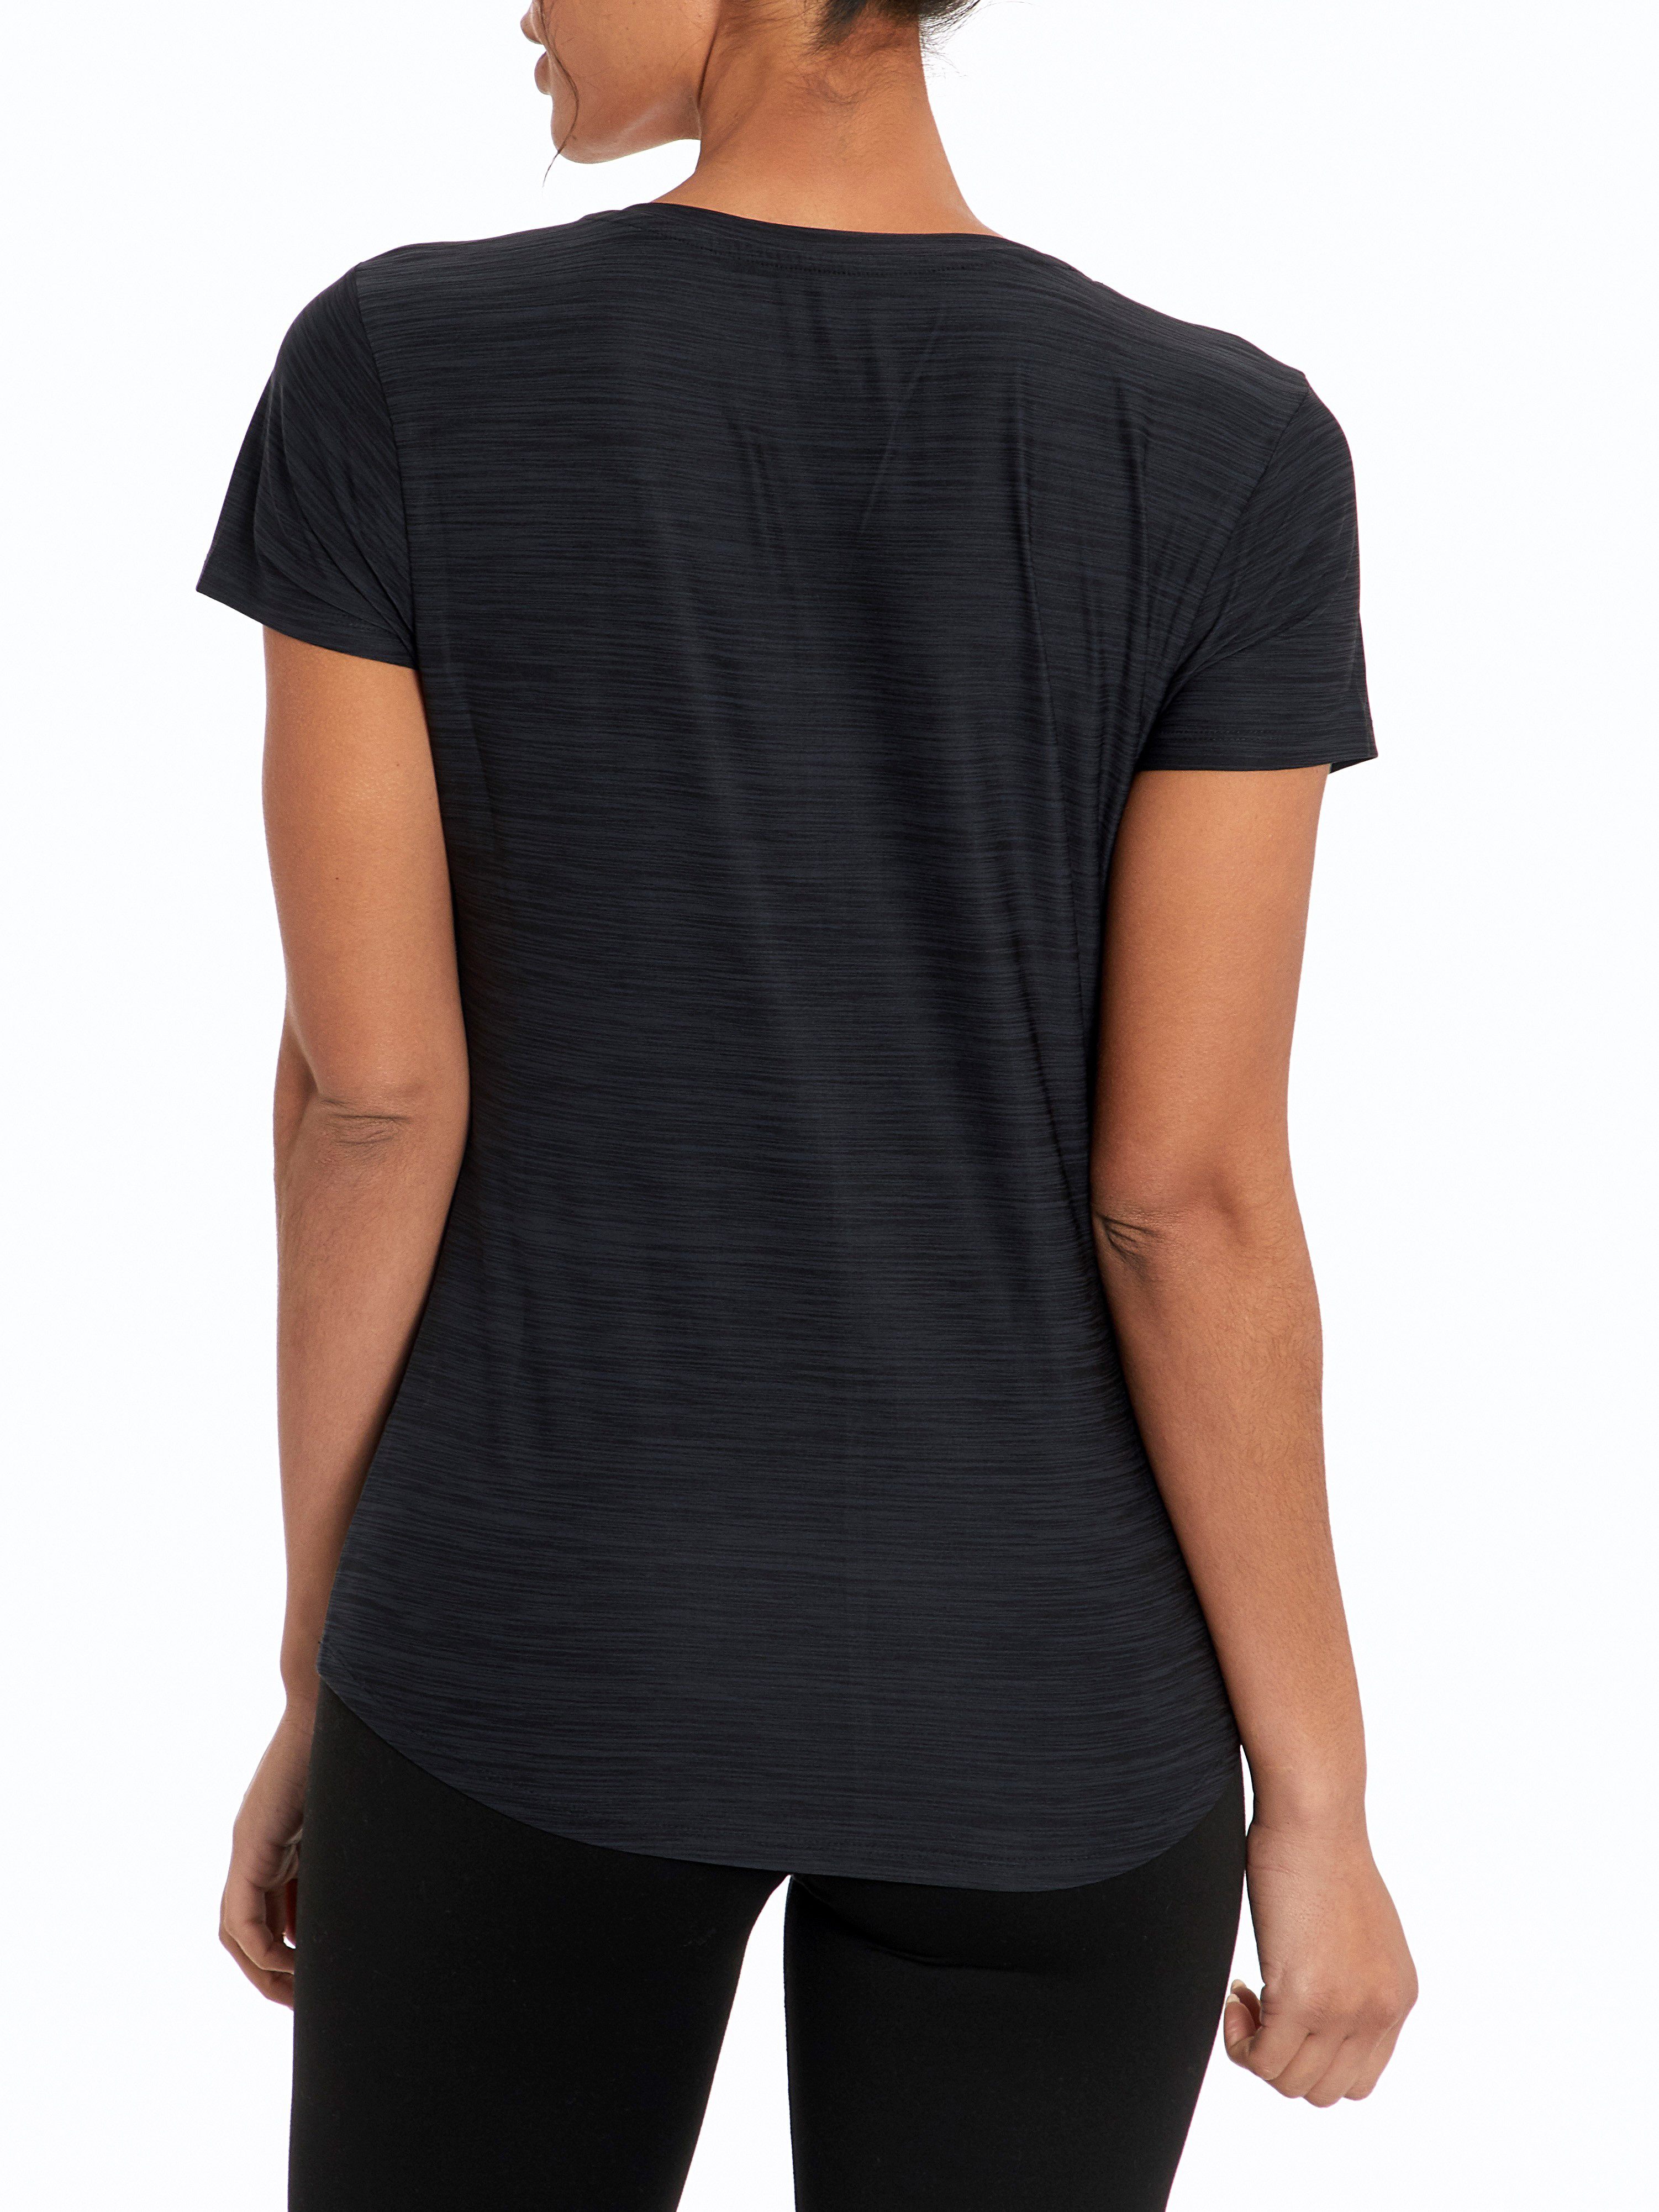 Bally Total Fitness Women's Active Mitered Tee - image 2 of 3